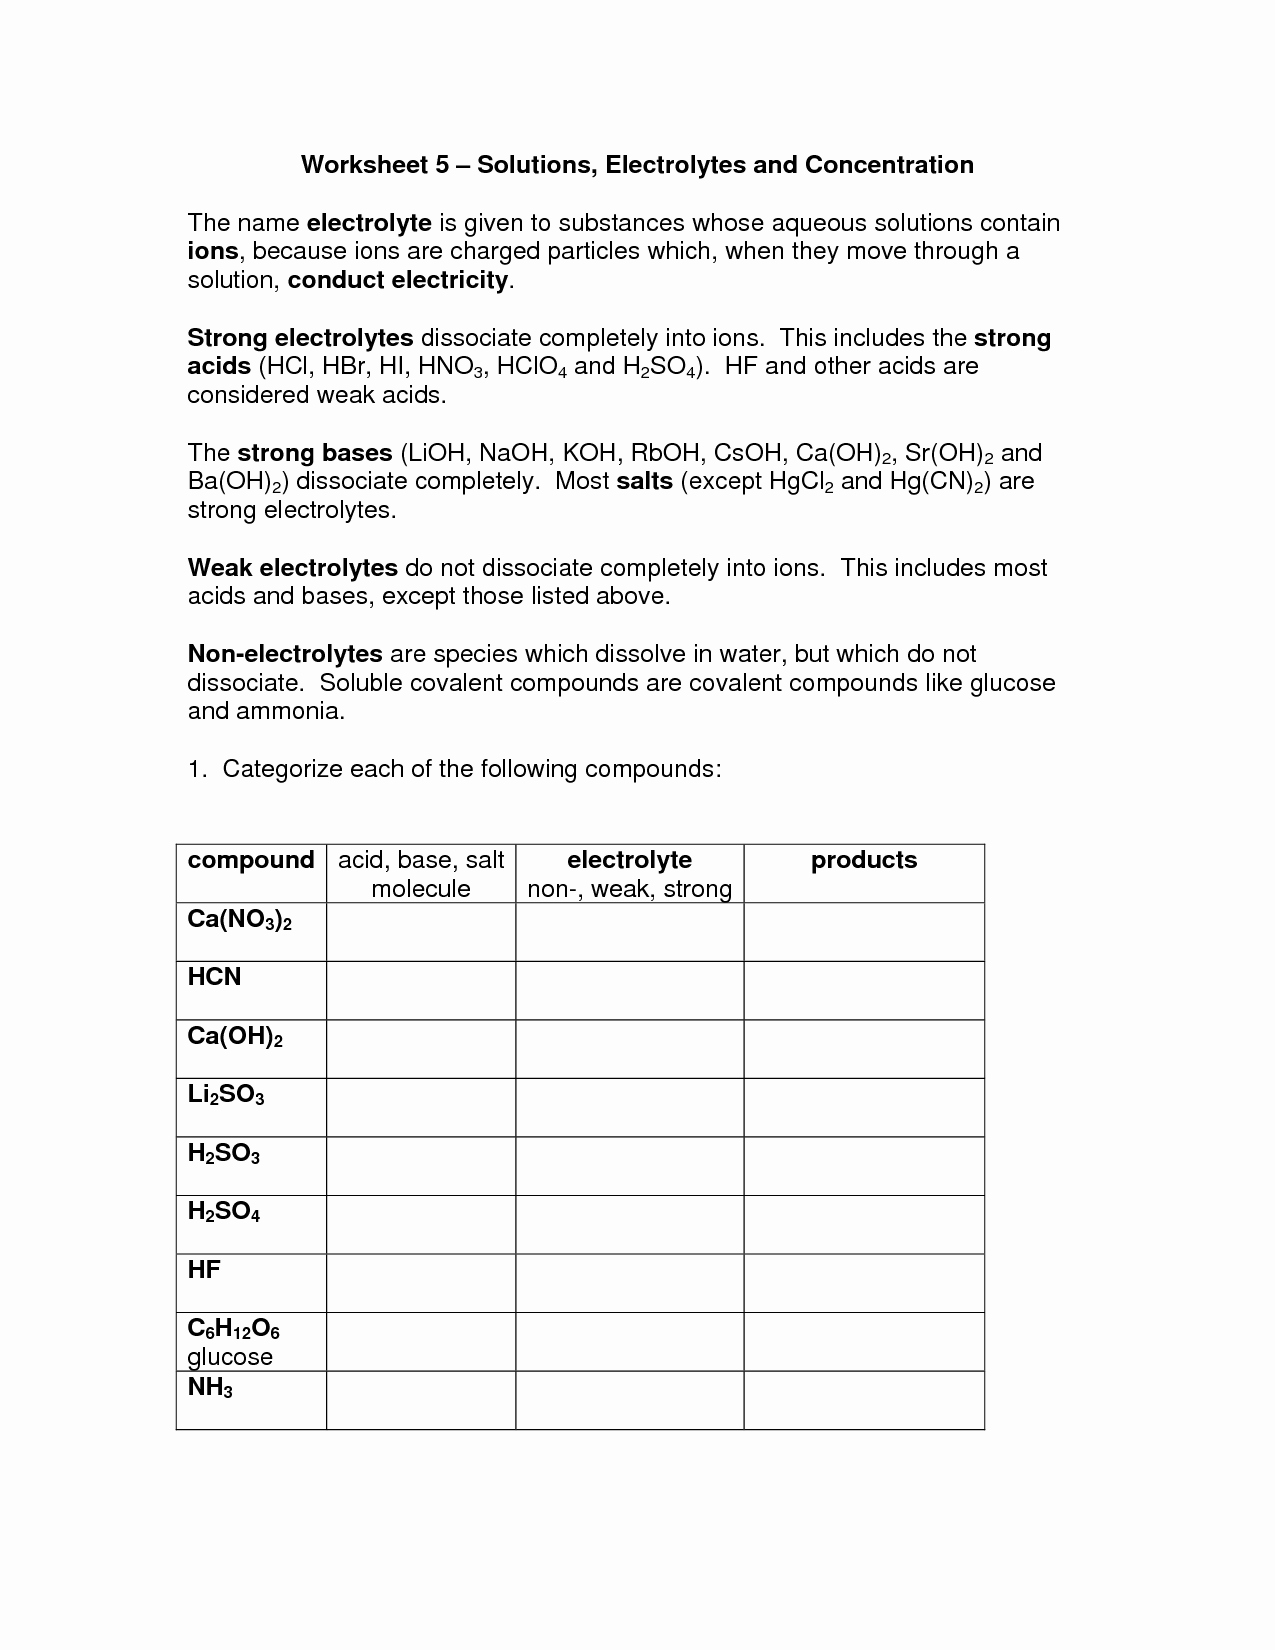 Mixtures and solutions Worksheet Answers Best Of 11 Best Of 5th Grade Science Mixtures and solutions